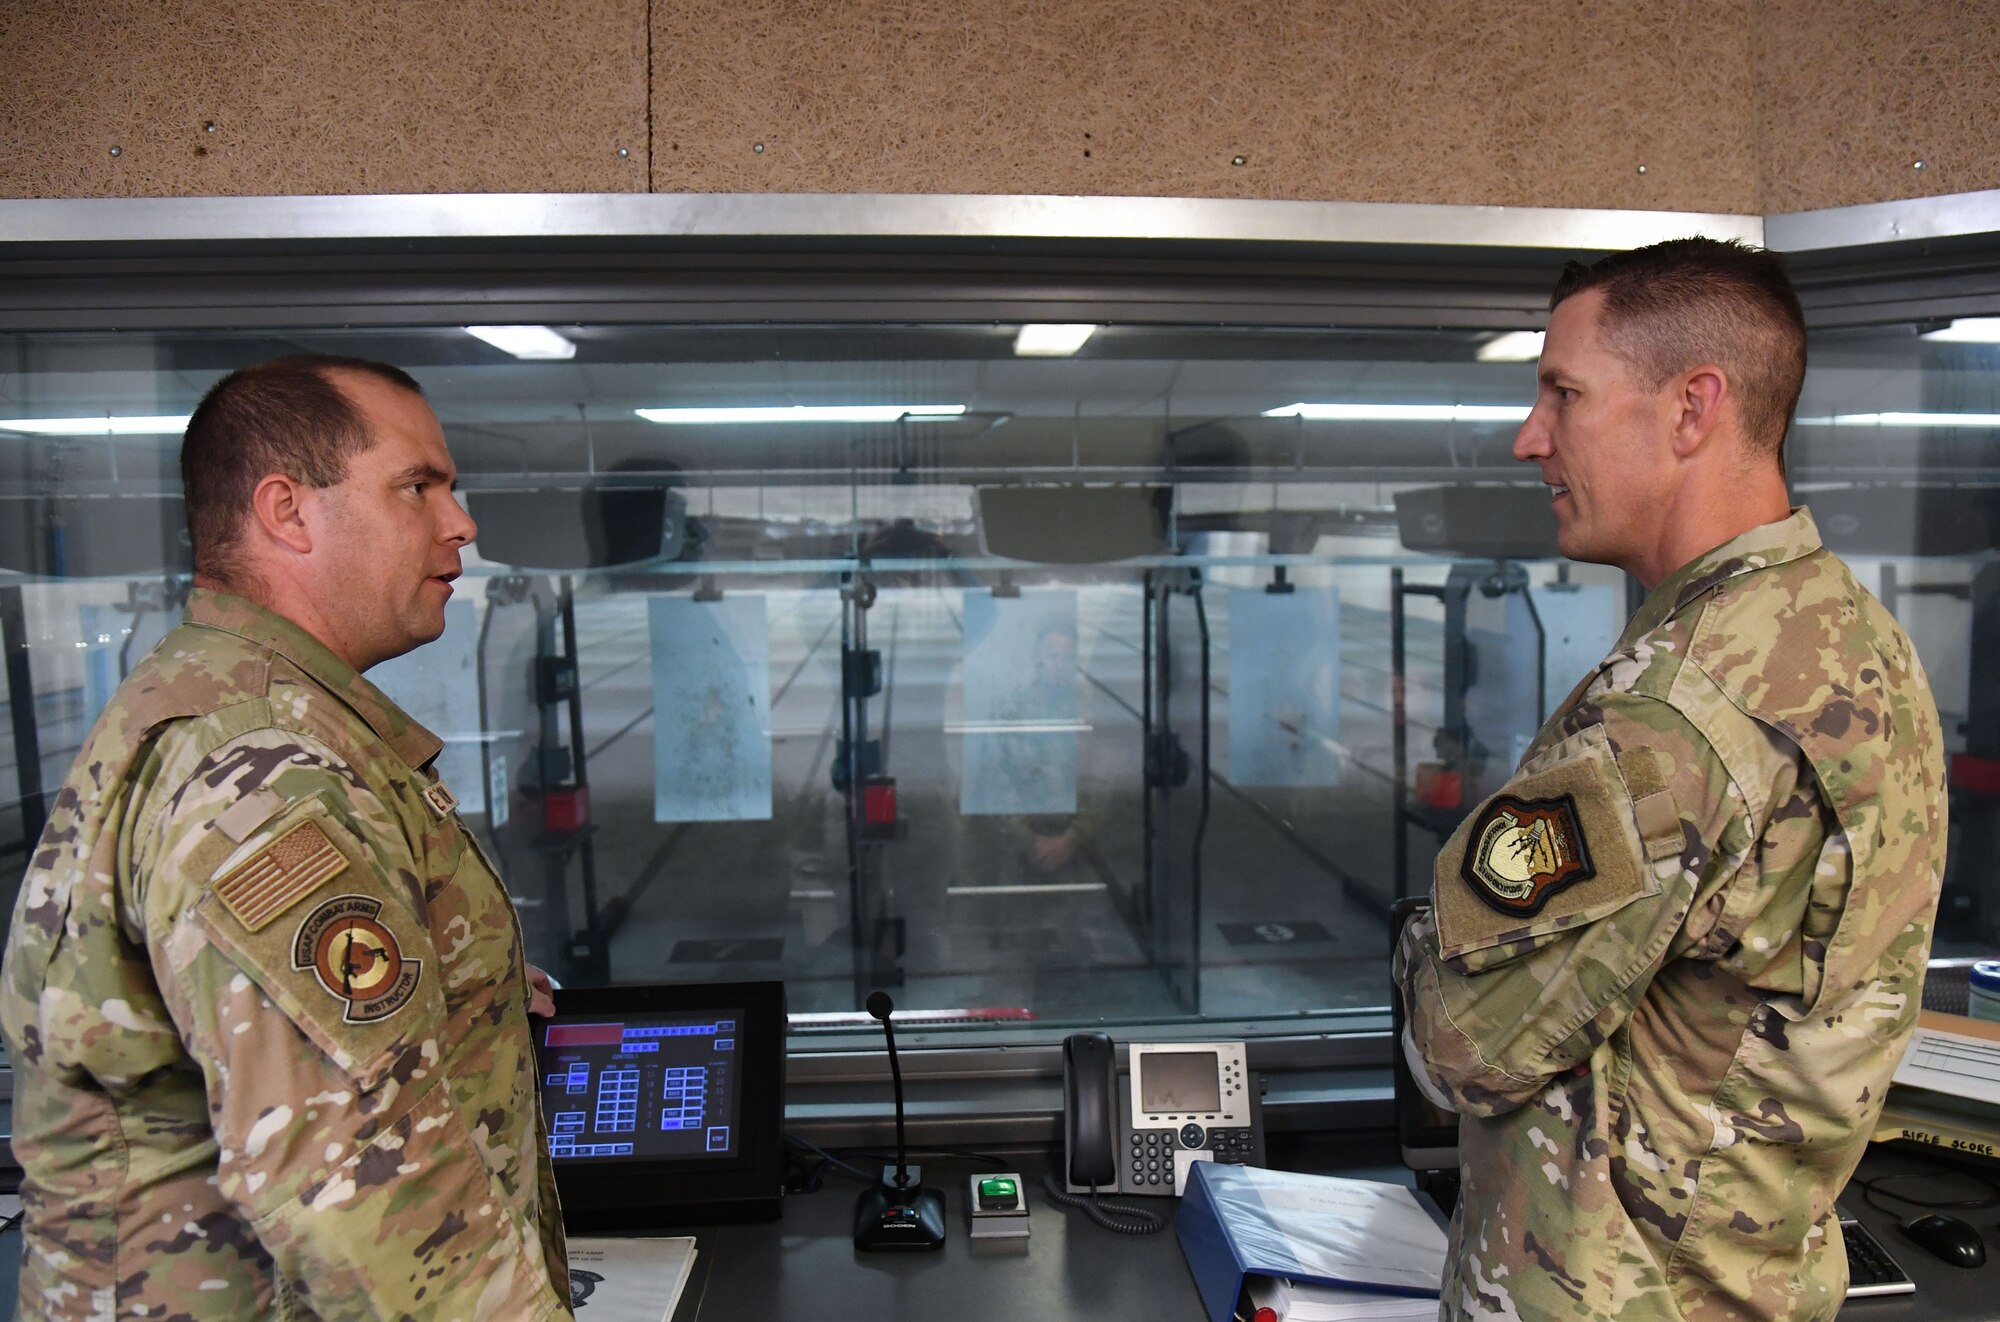 U.S. Air Force Staff Sgt. Jesse Peterson, 81st Security Forces Squadron combat arms NCO in charge, provides Col. Billy Pope, 81st Training Wing commander, with a tour inside the 81st SFS indoor firing range during the 81st MSG Immersion Tour at Keesler Air Force Base, Mississippi, April 7, 2023.